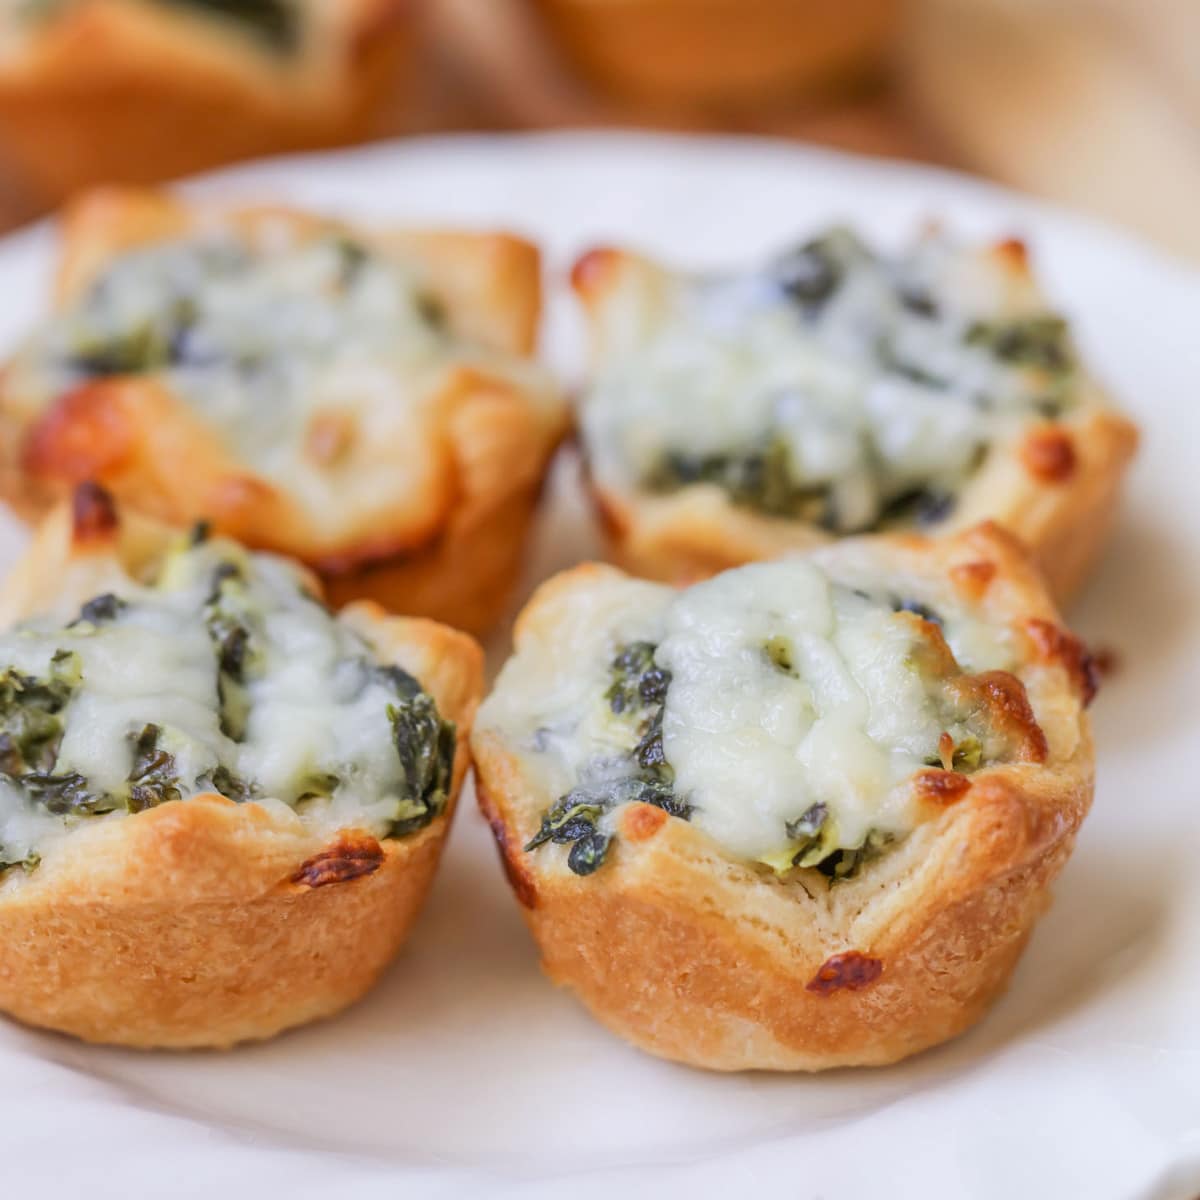 Finger food appetizers - spinach dip bites topped with melted cheese.